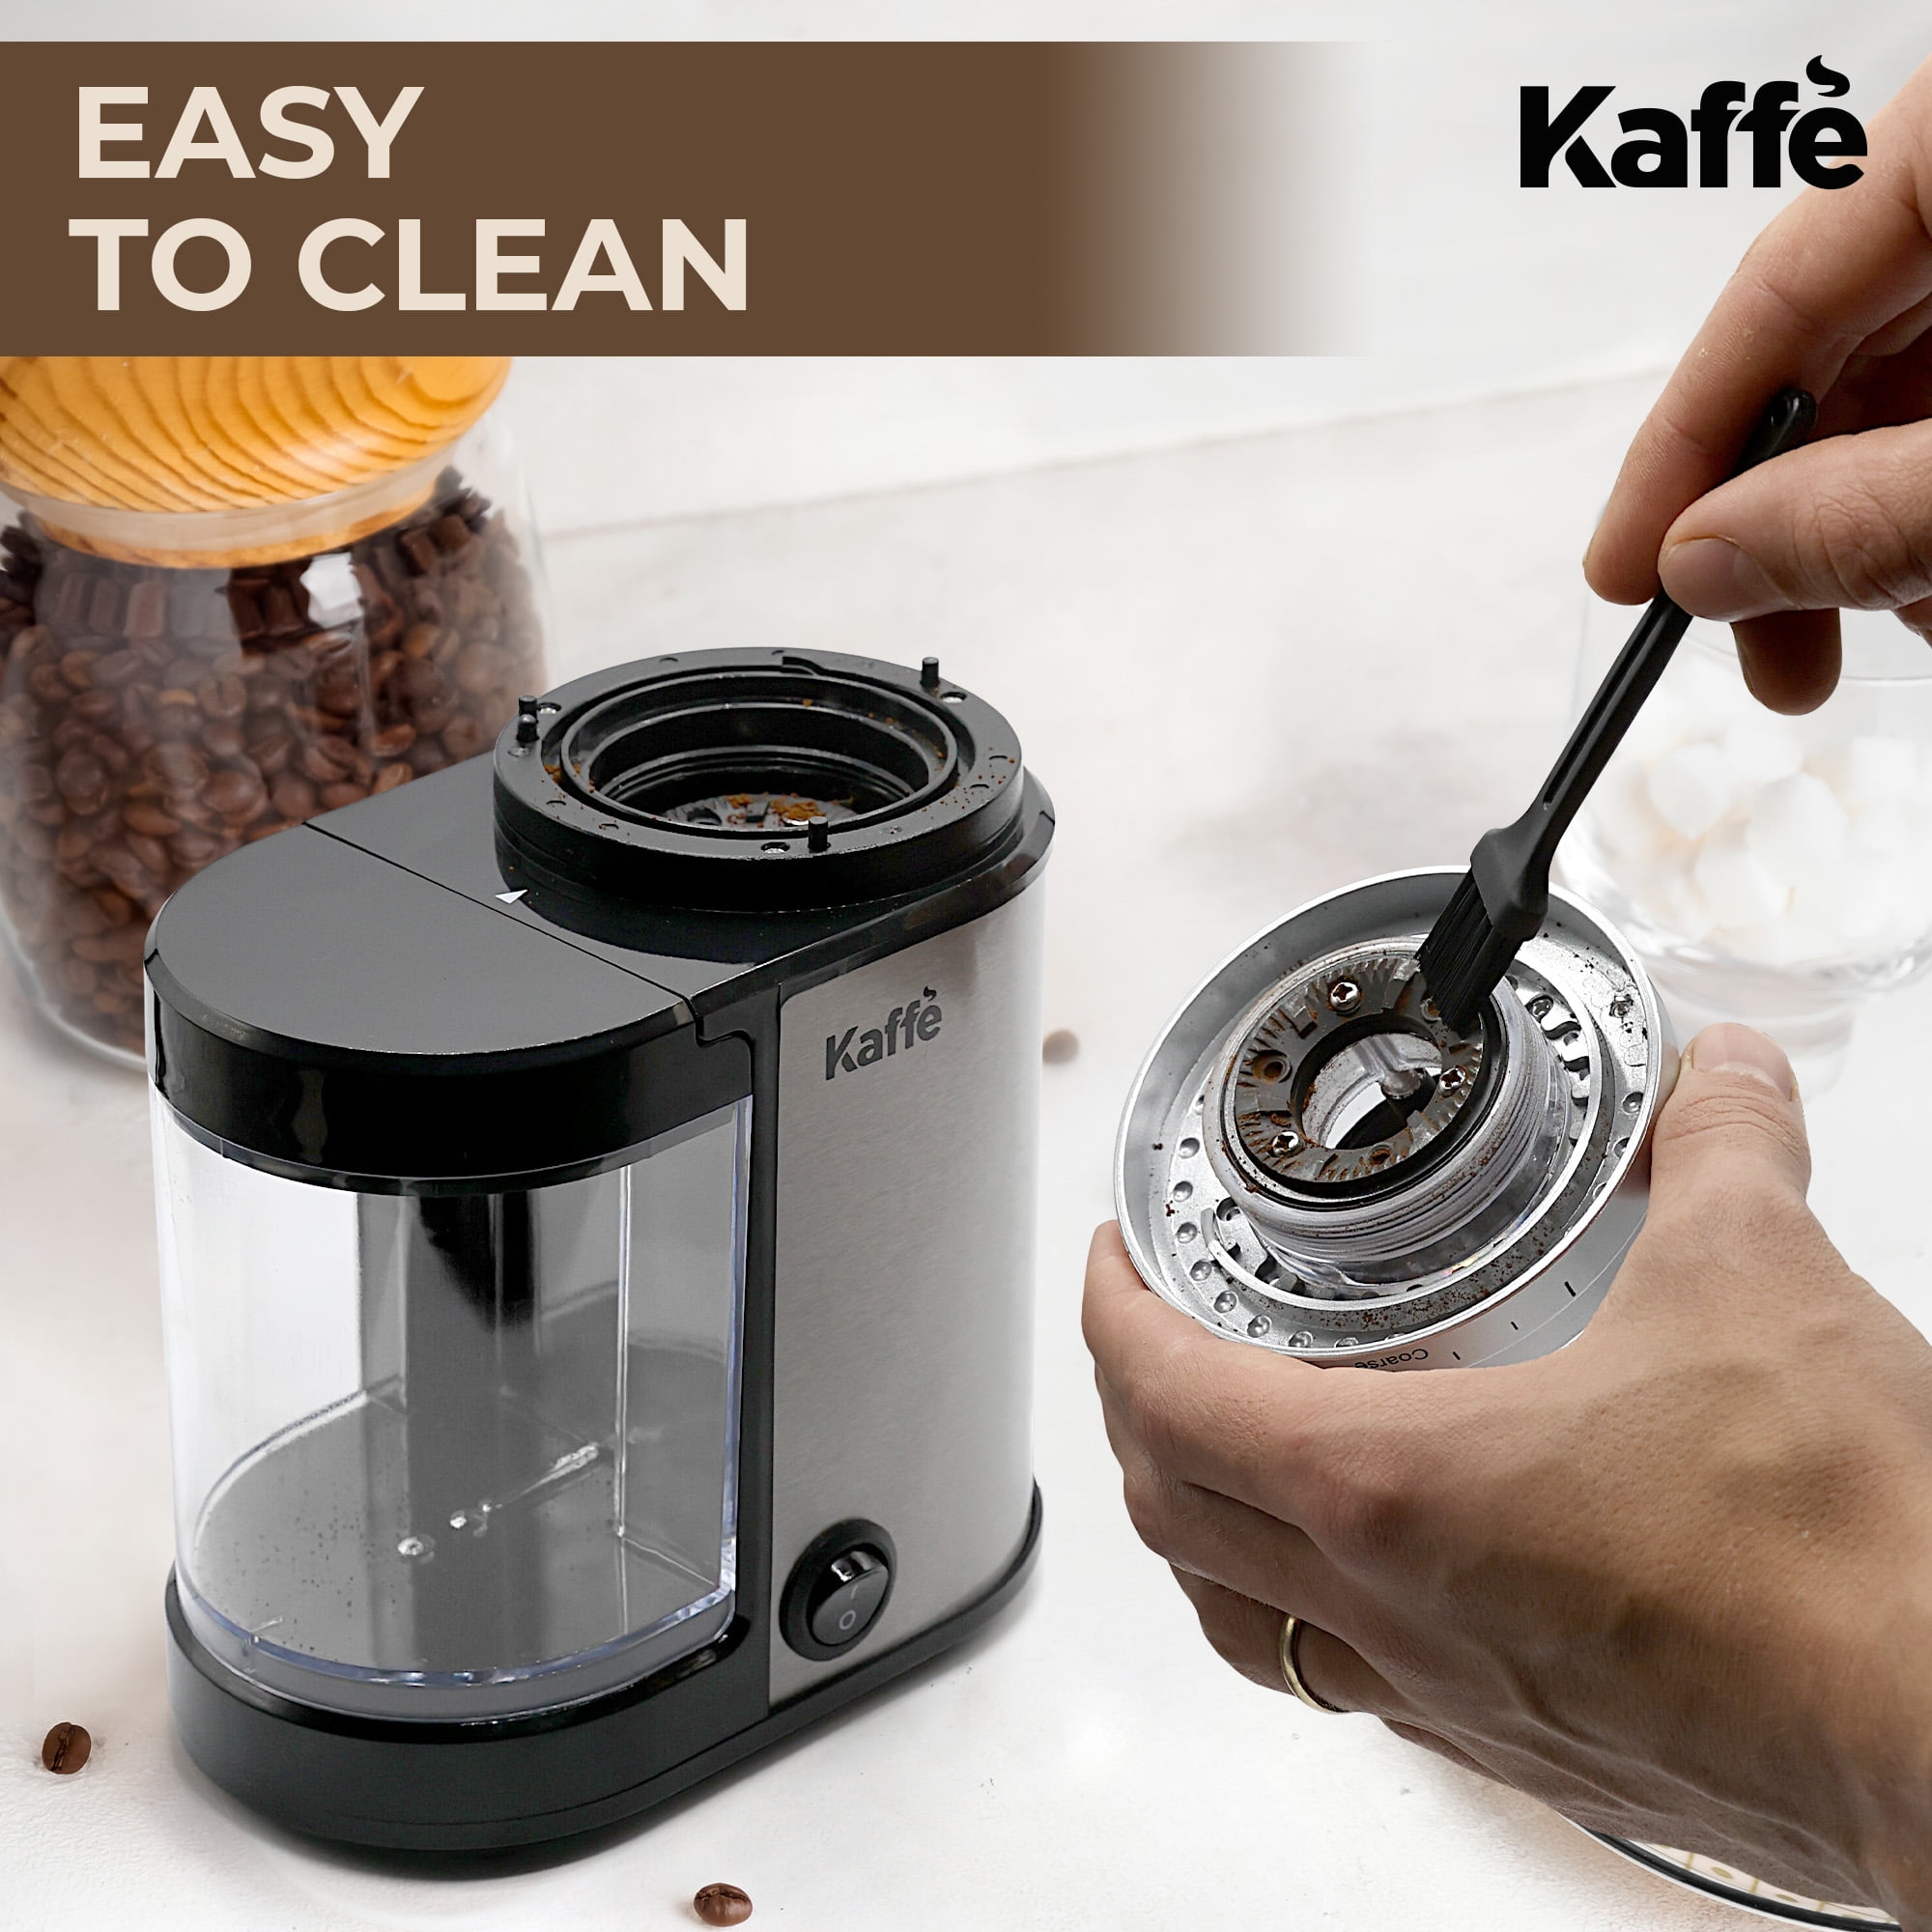 Kaffe Coffee Grinder Electric. Best Coffee Grinders for Home Use. (14 Cup)  Easy On/Off w/Cleaning Brush Included. White